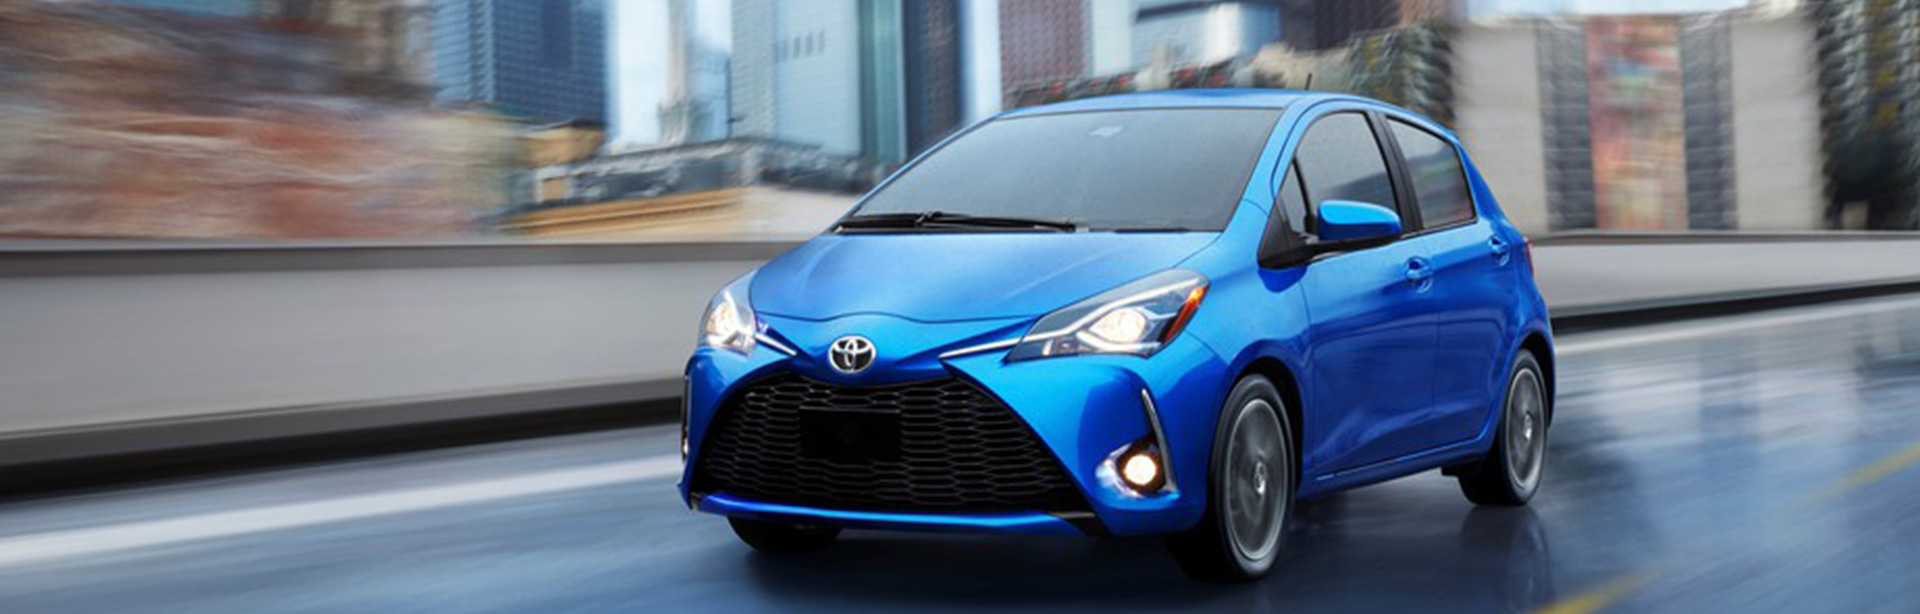 The 2020 Toyota Yaris Everything You Need To Know Hialeah Fl